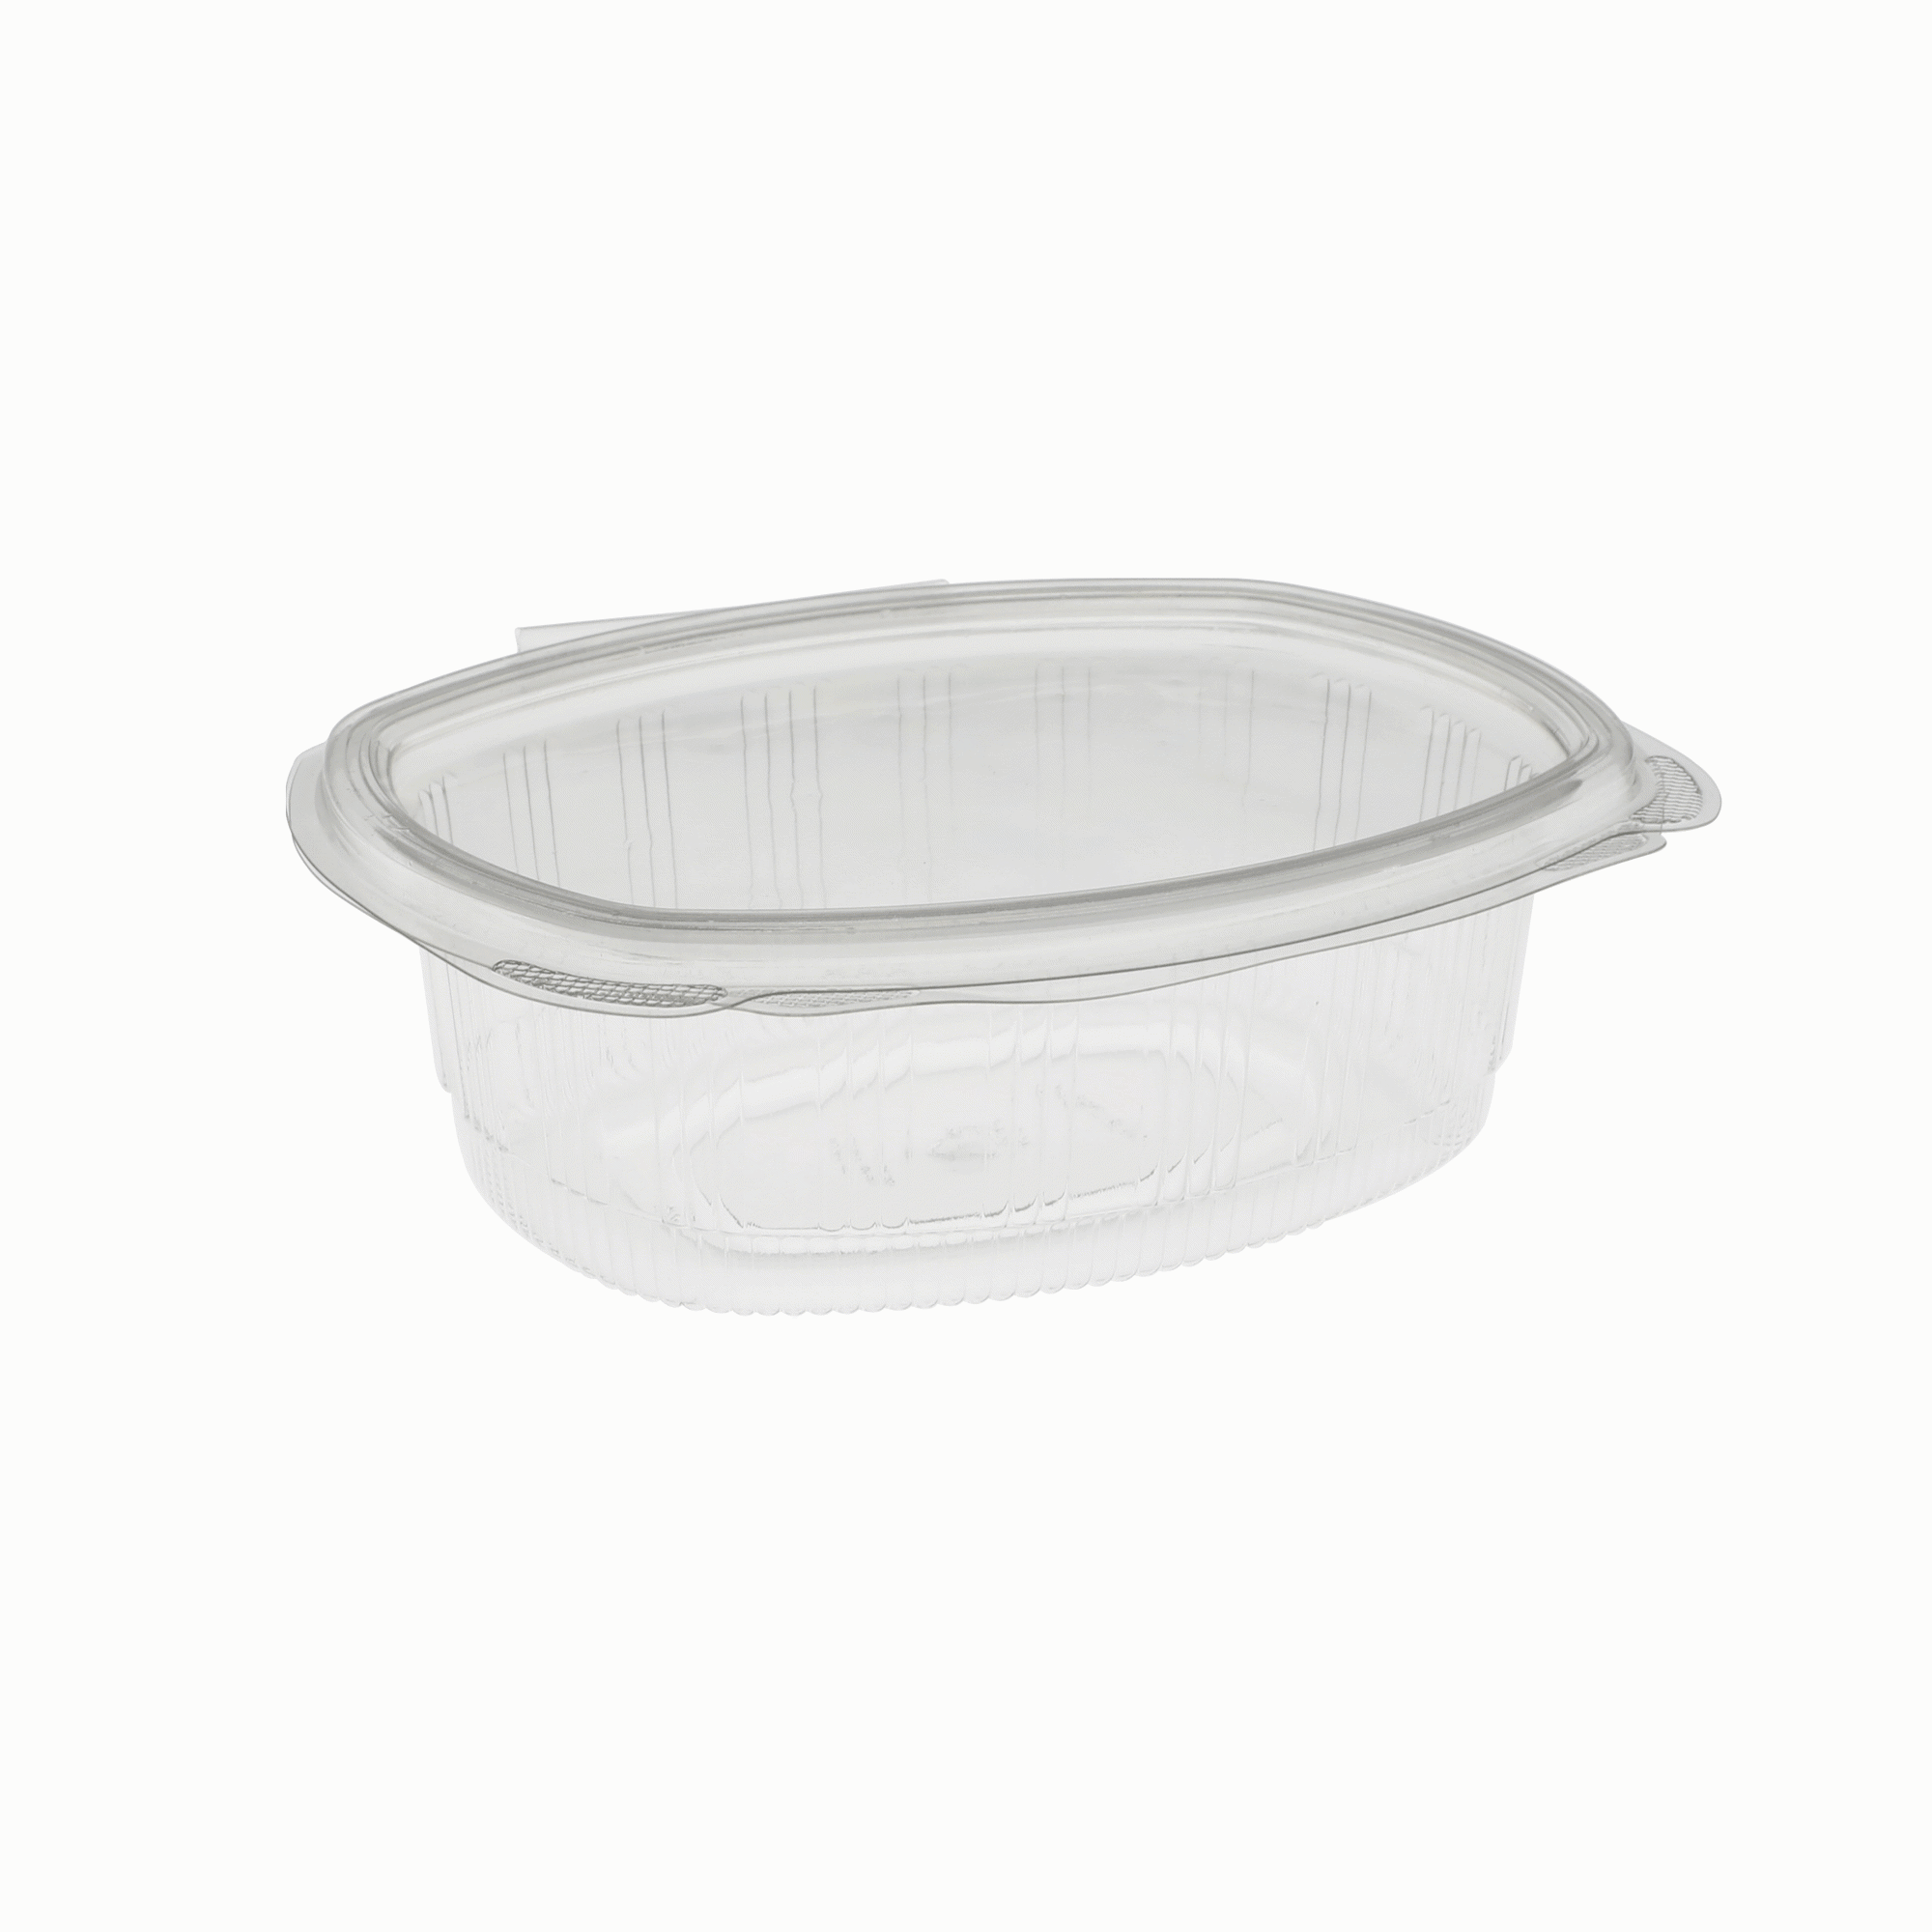 Choice 24 oz. Clear RPET Tall Hinged Deli Container with Domed Lid - 50/Pack